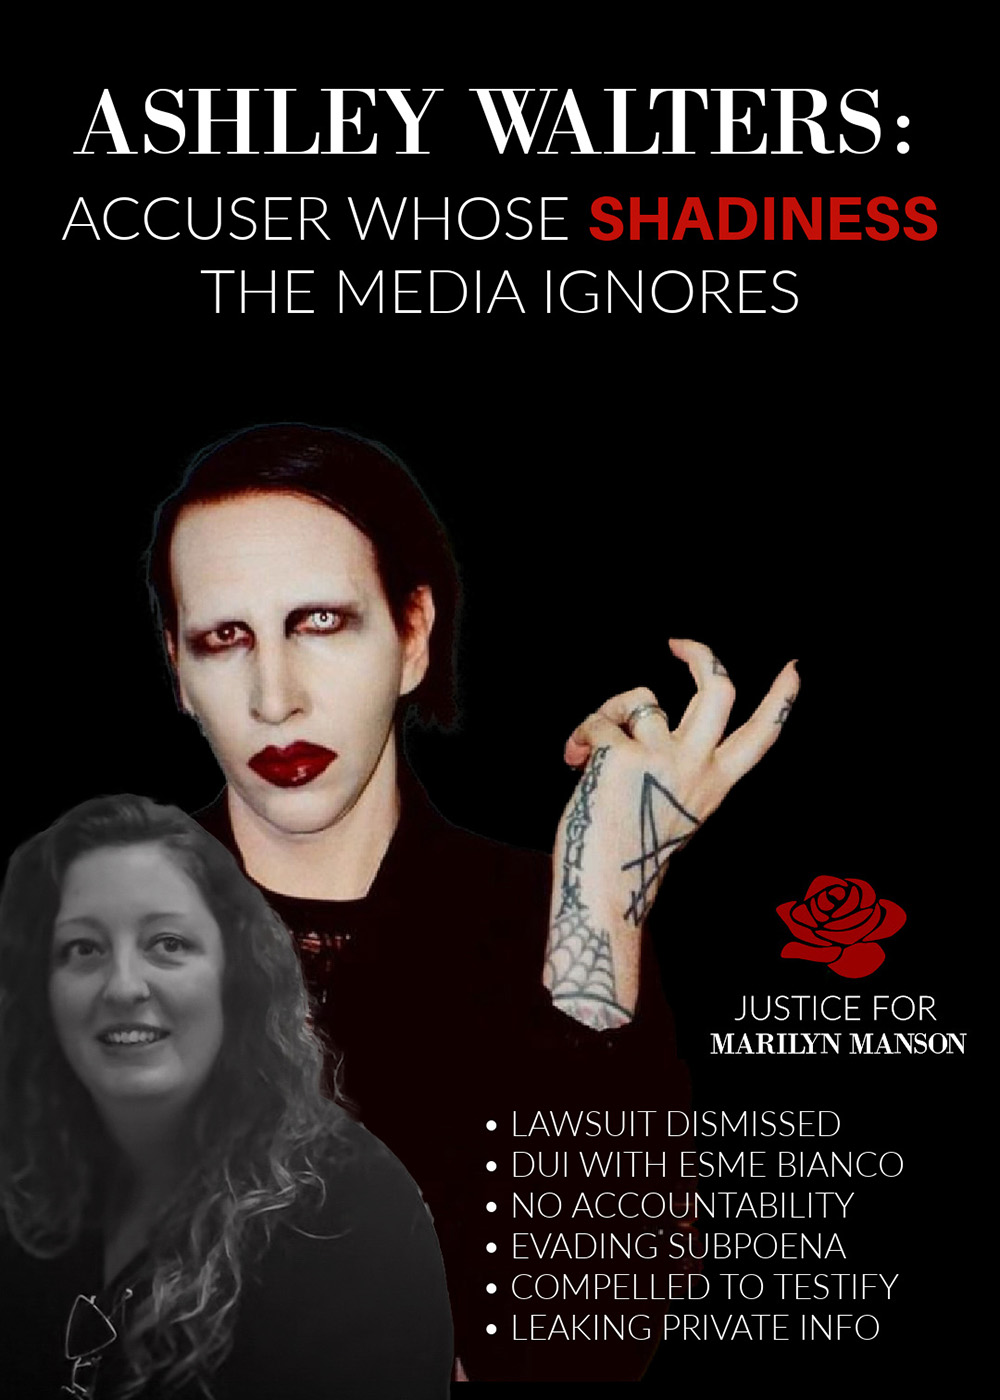 Ashley Walters Marilyn Manson shadiness in the abuse hoax built by Evan Rachel Wood and her employee Ashley Illma Gore